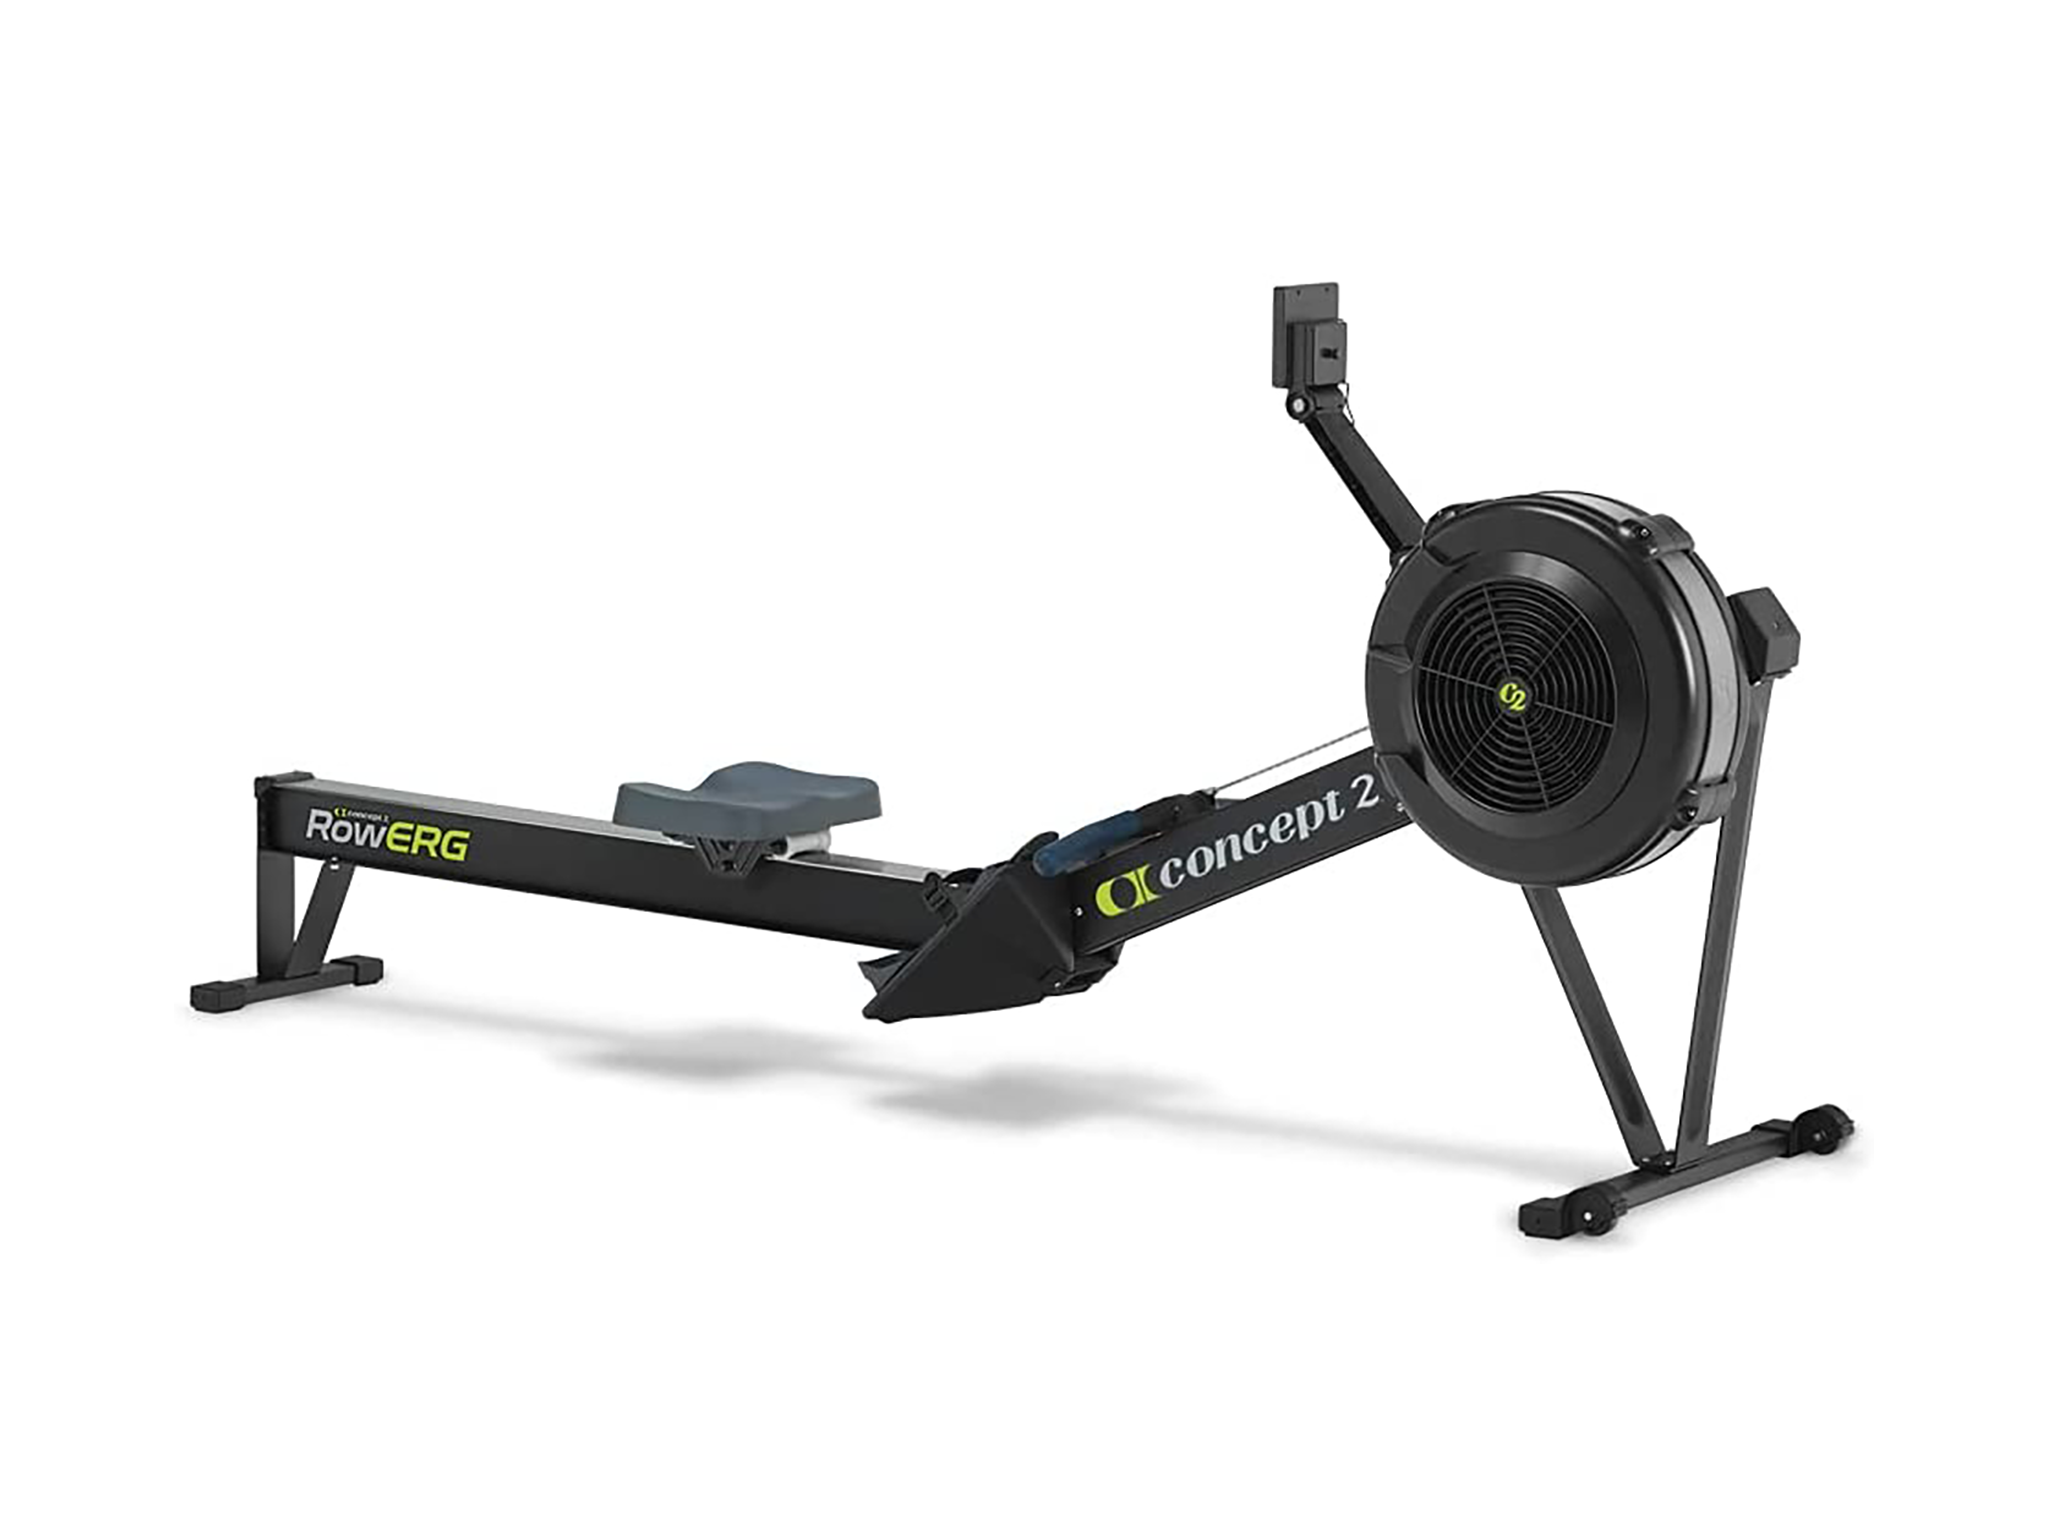 Concept 2 rowerg.png